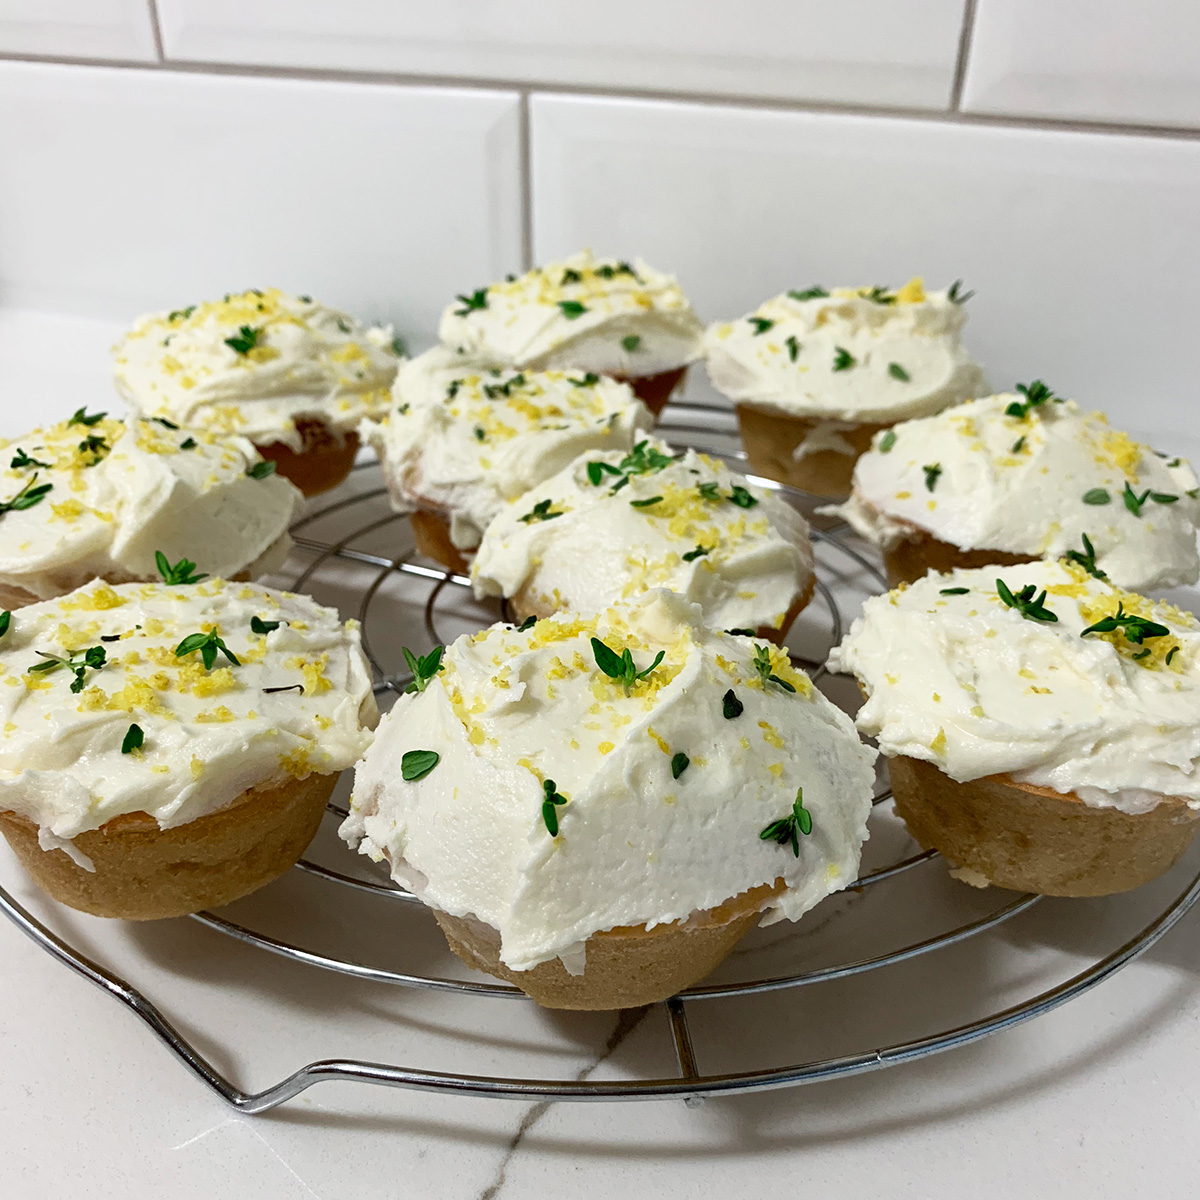 lemon and thyme cake made into cupcakes